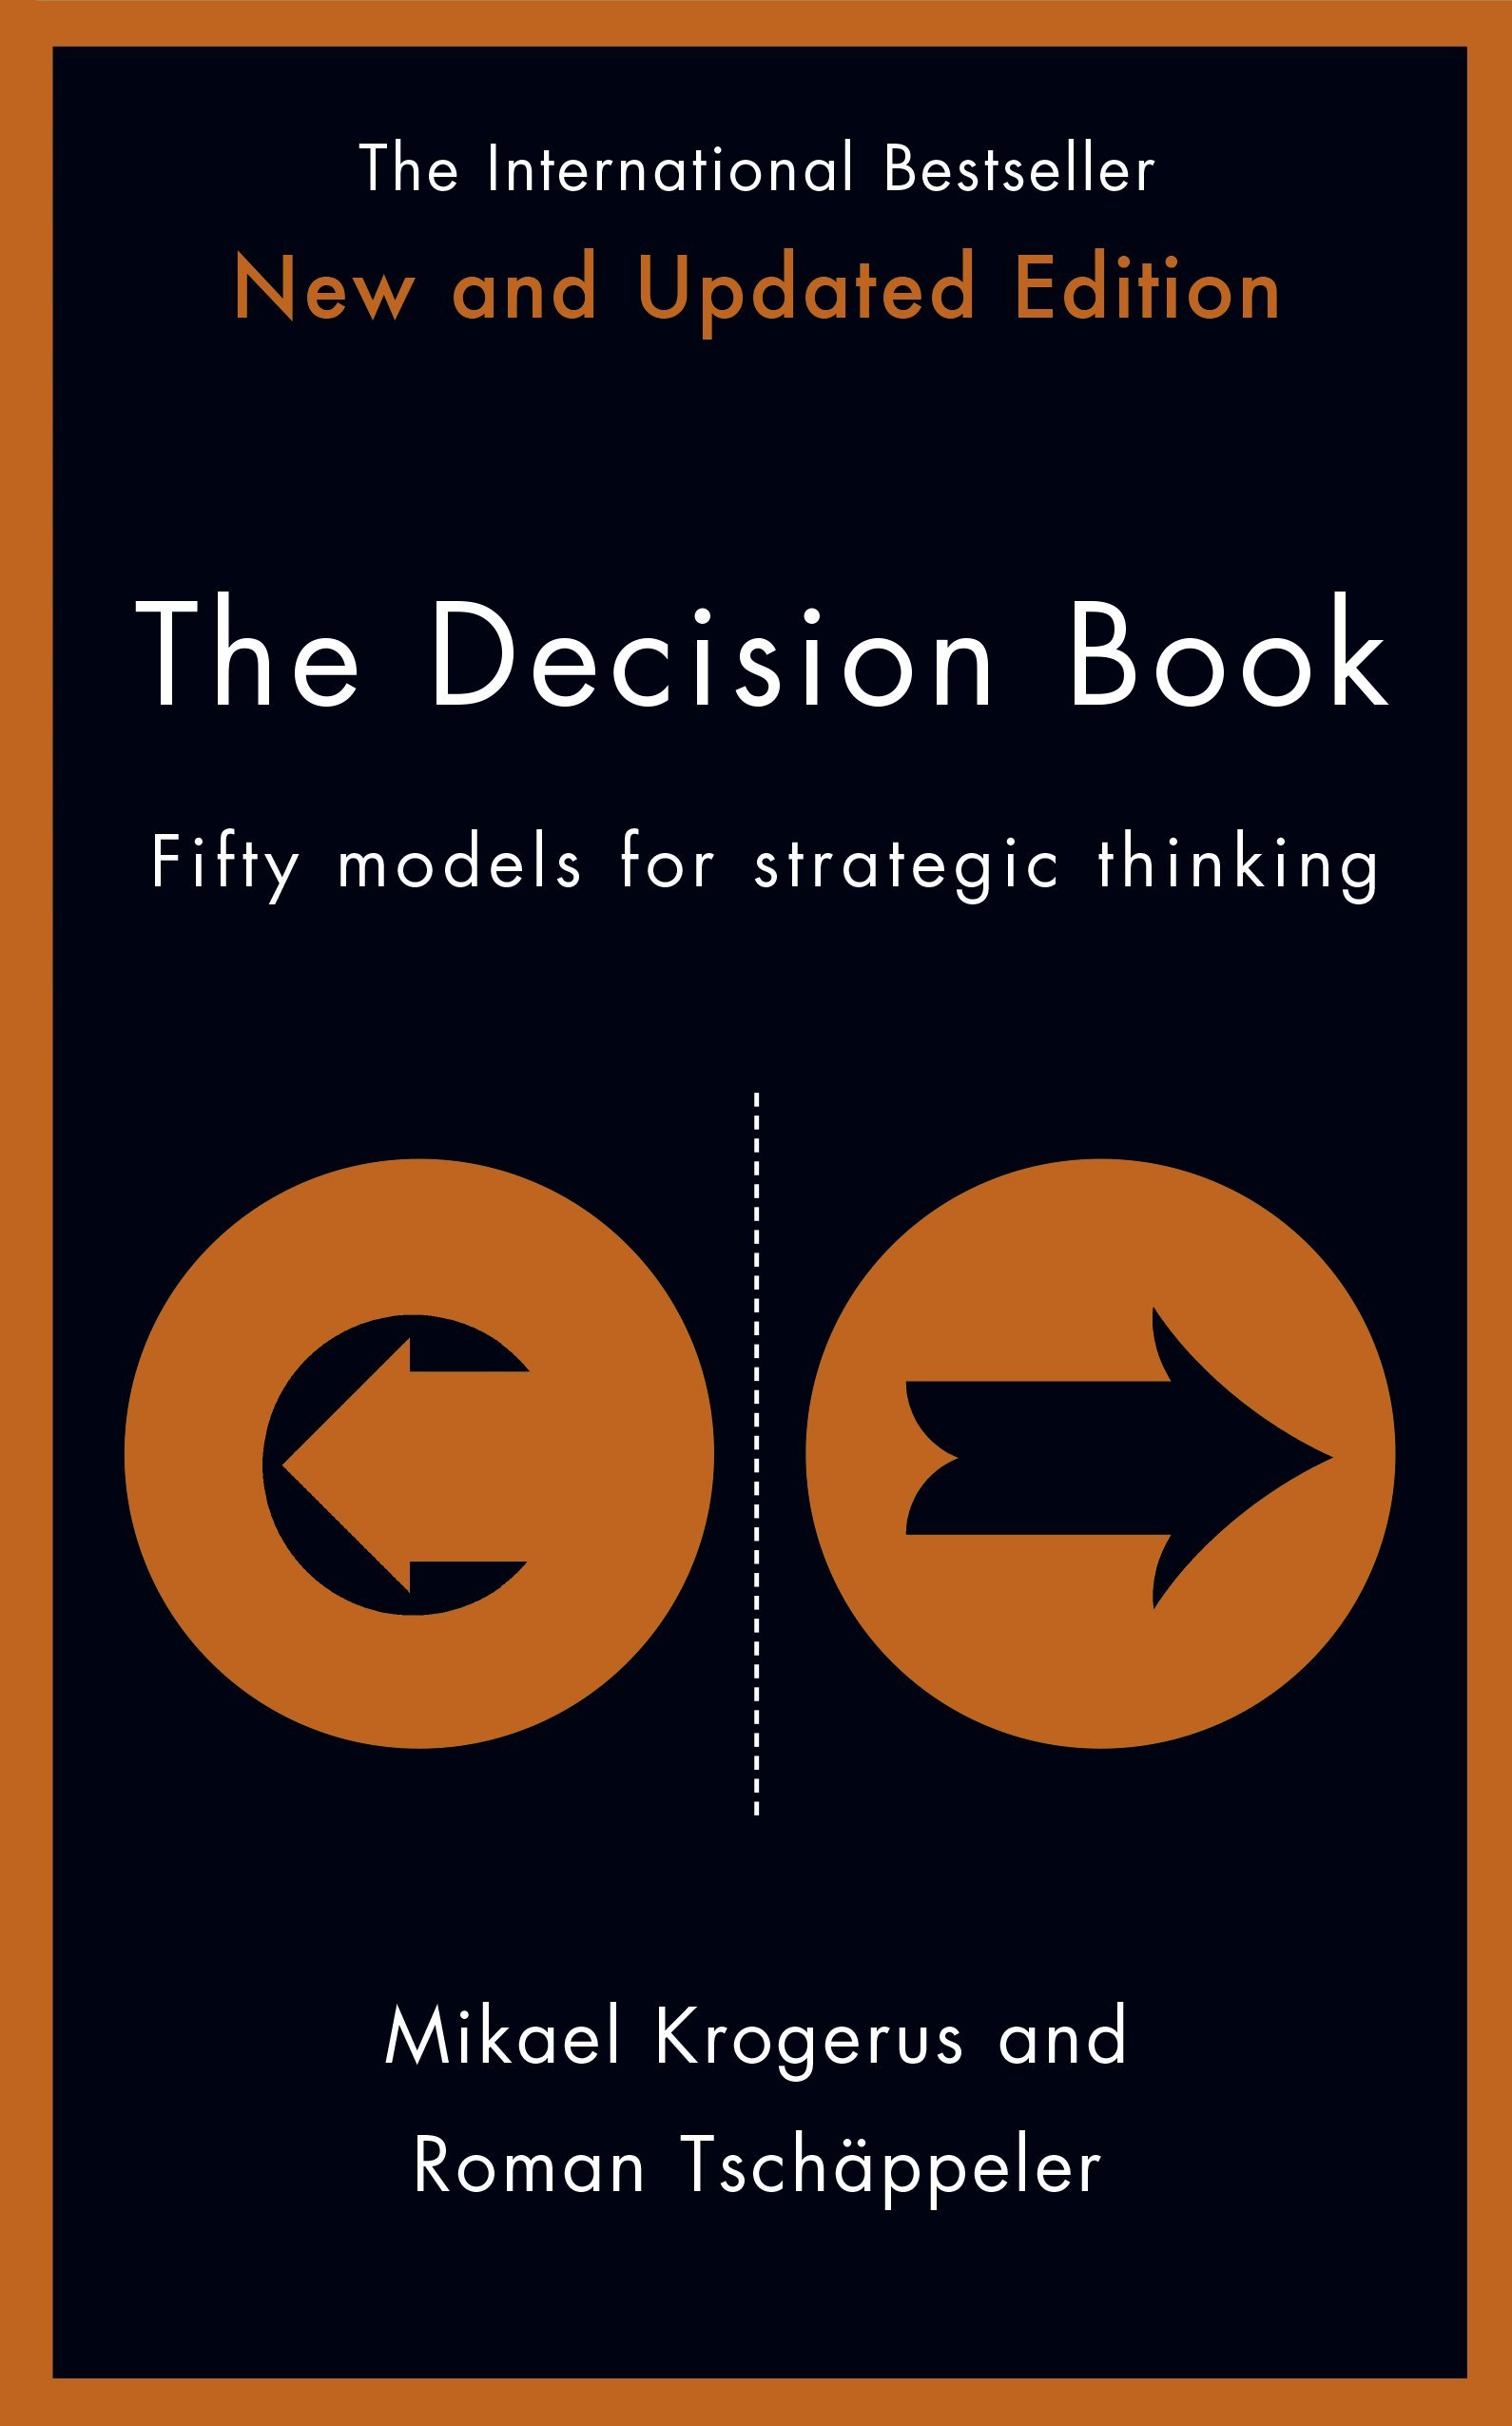 THE DECISION BOOK- BOOK REVIEW